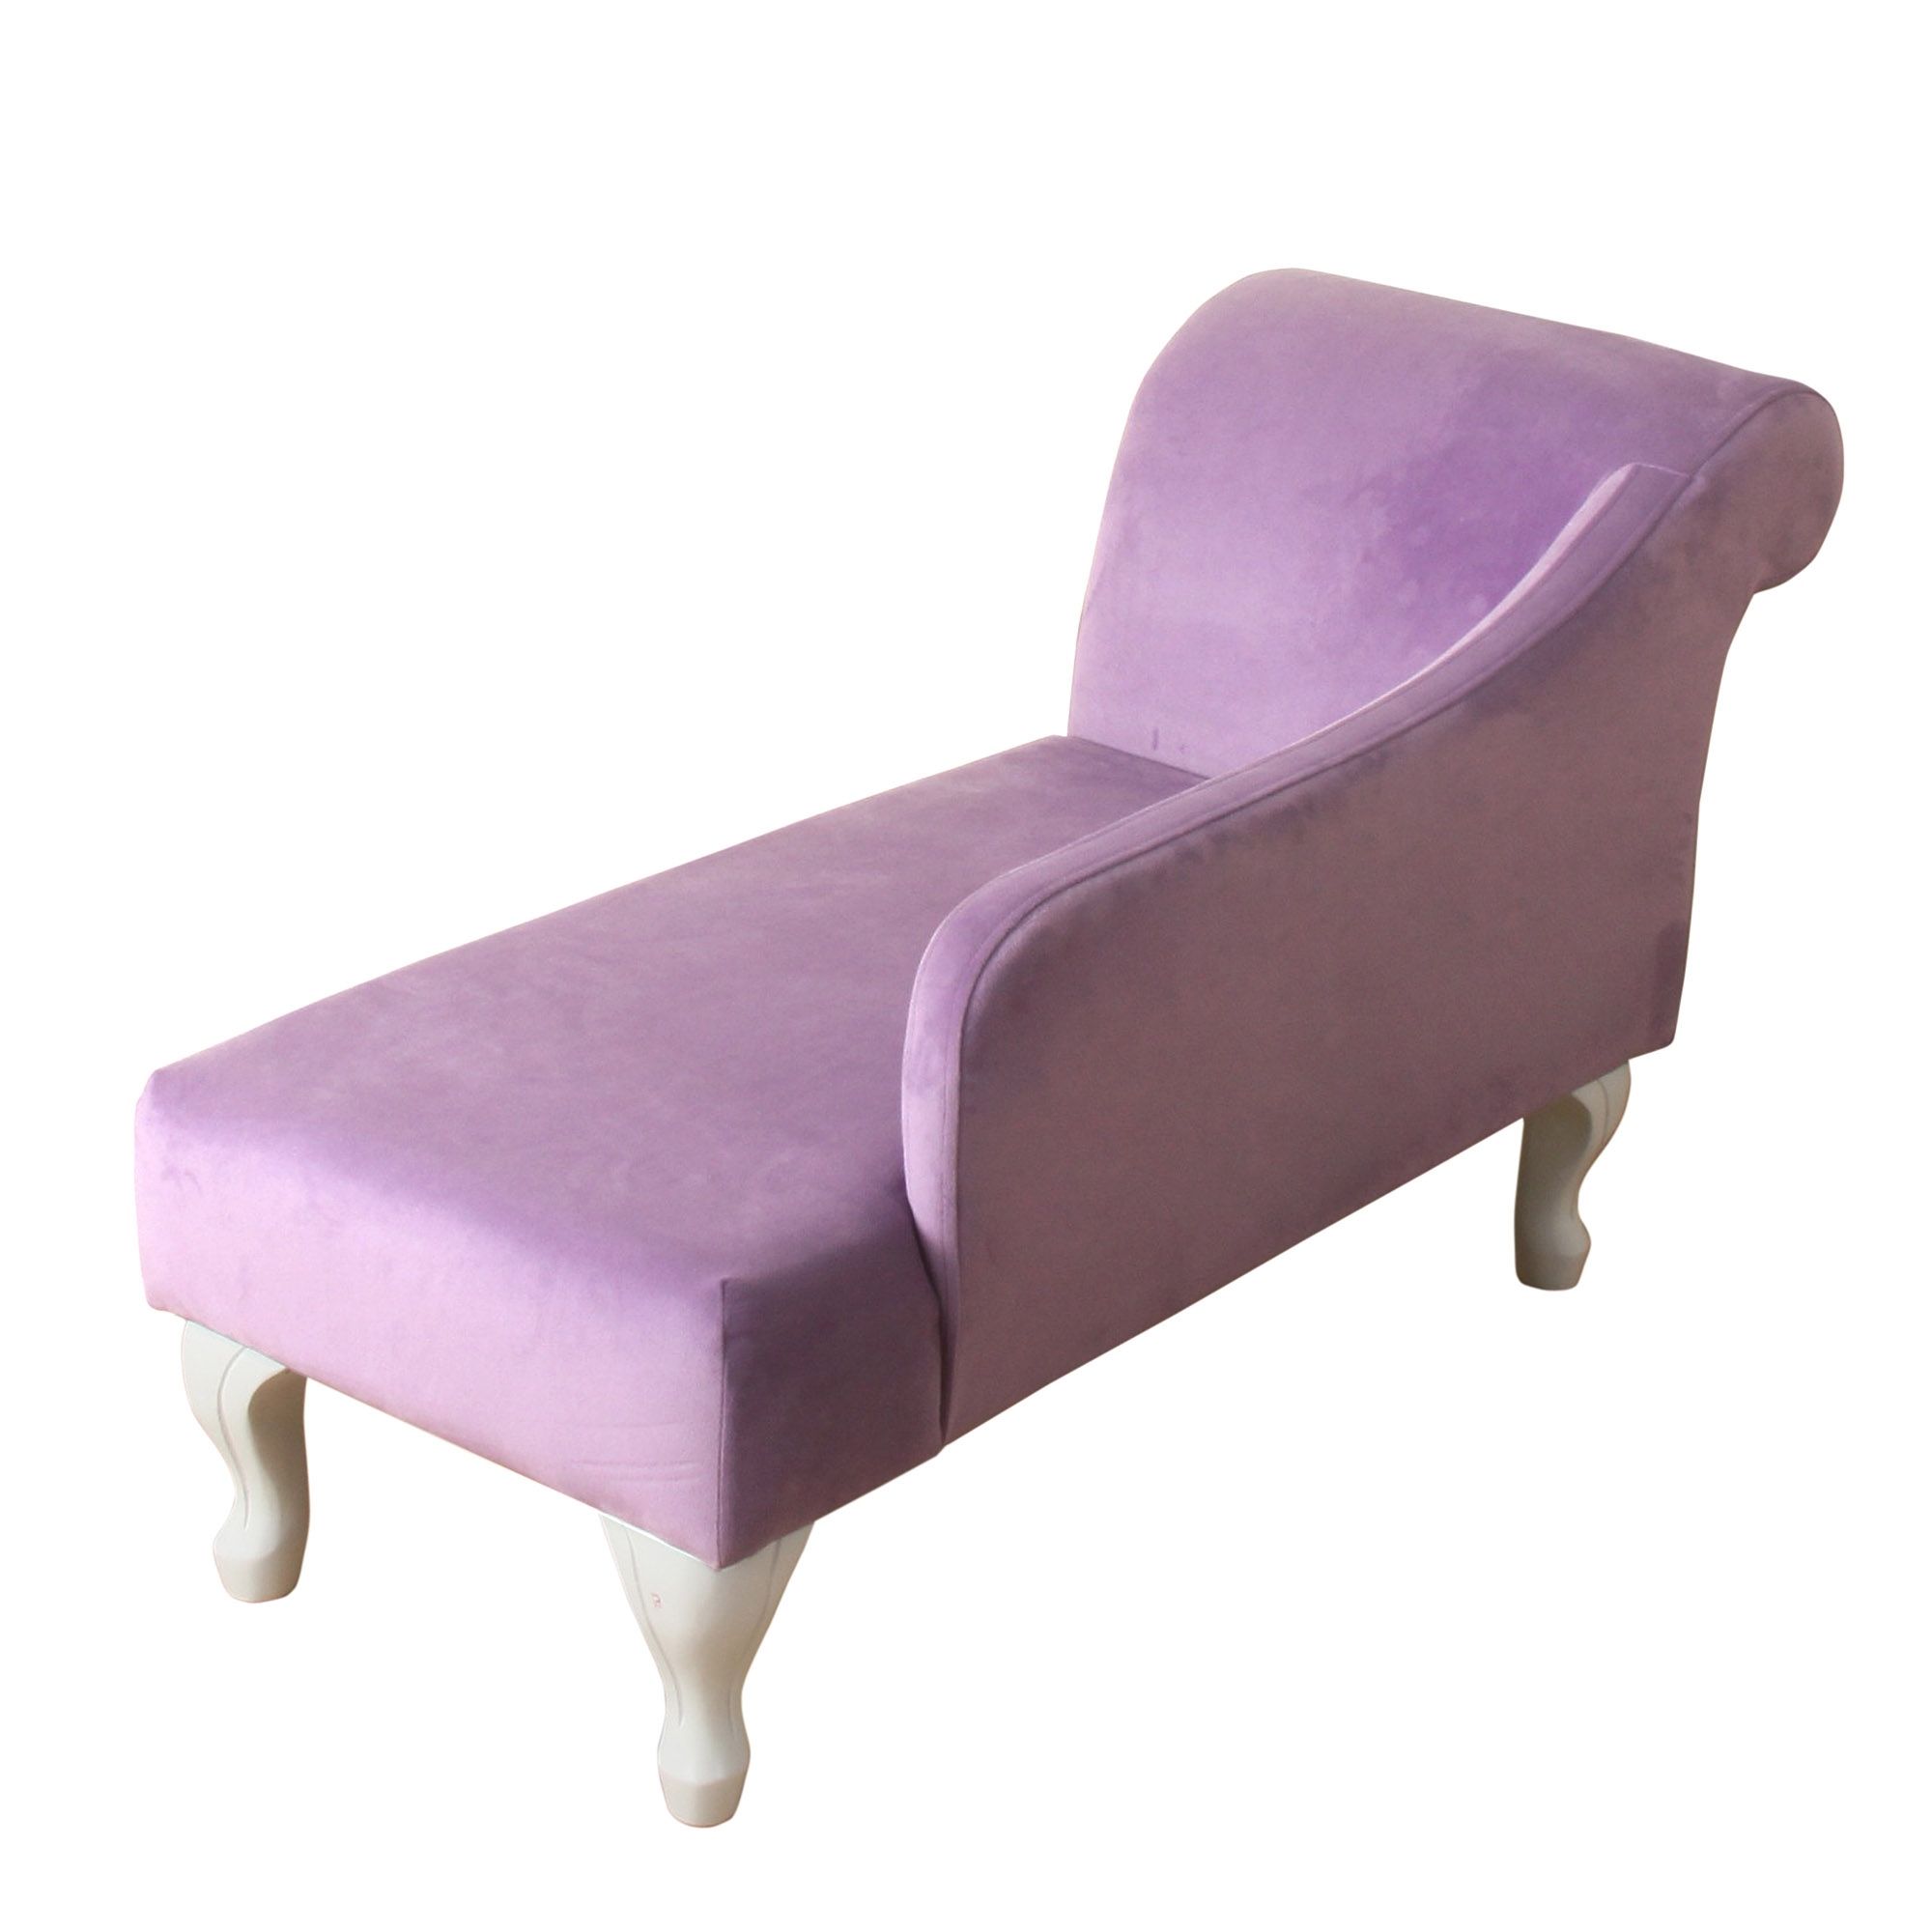 Latest Homepop Diva Juvenile Chaise Lounge – Homepop For Purple Chaise Lounges (View 8 of 15)